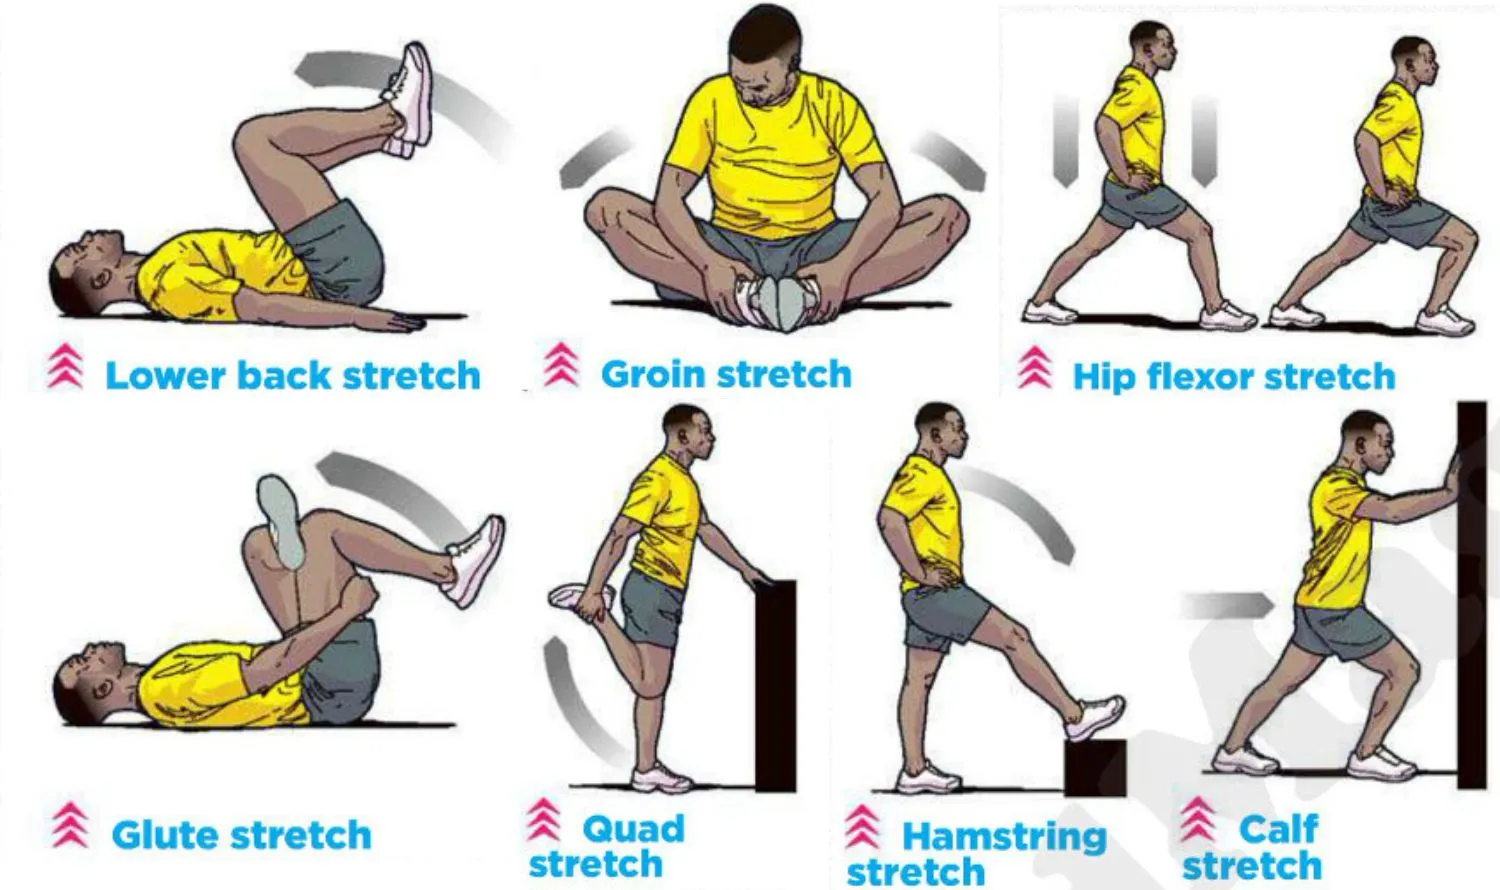 Exercise to stretching after the race